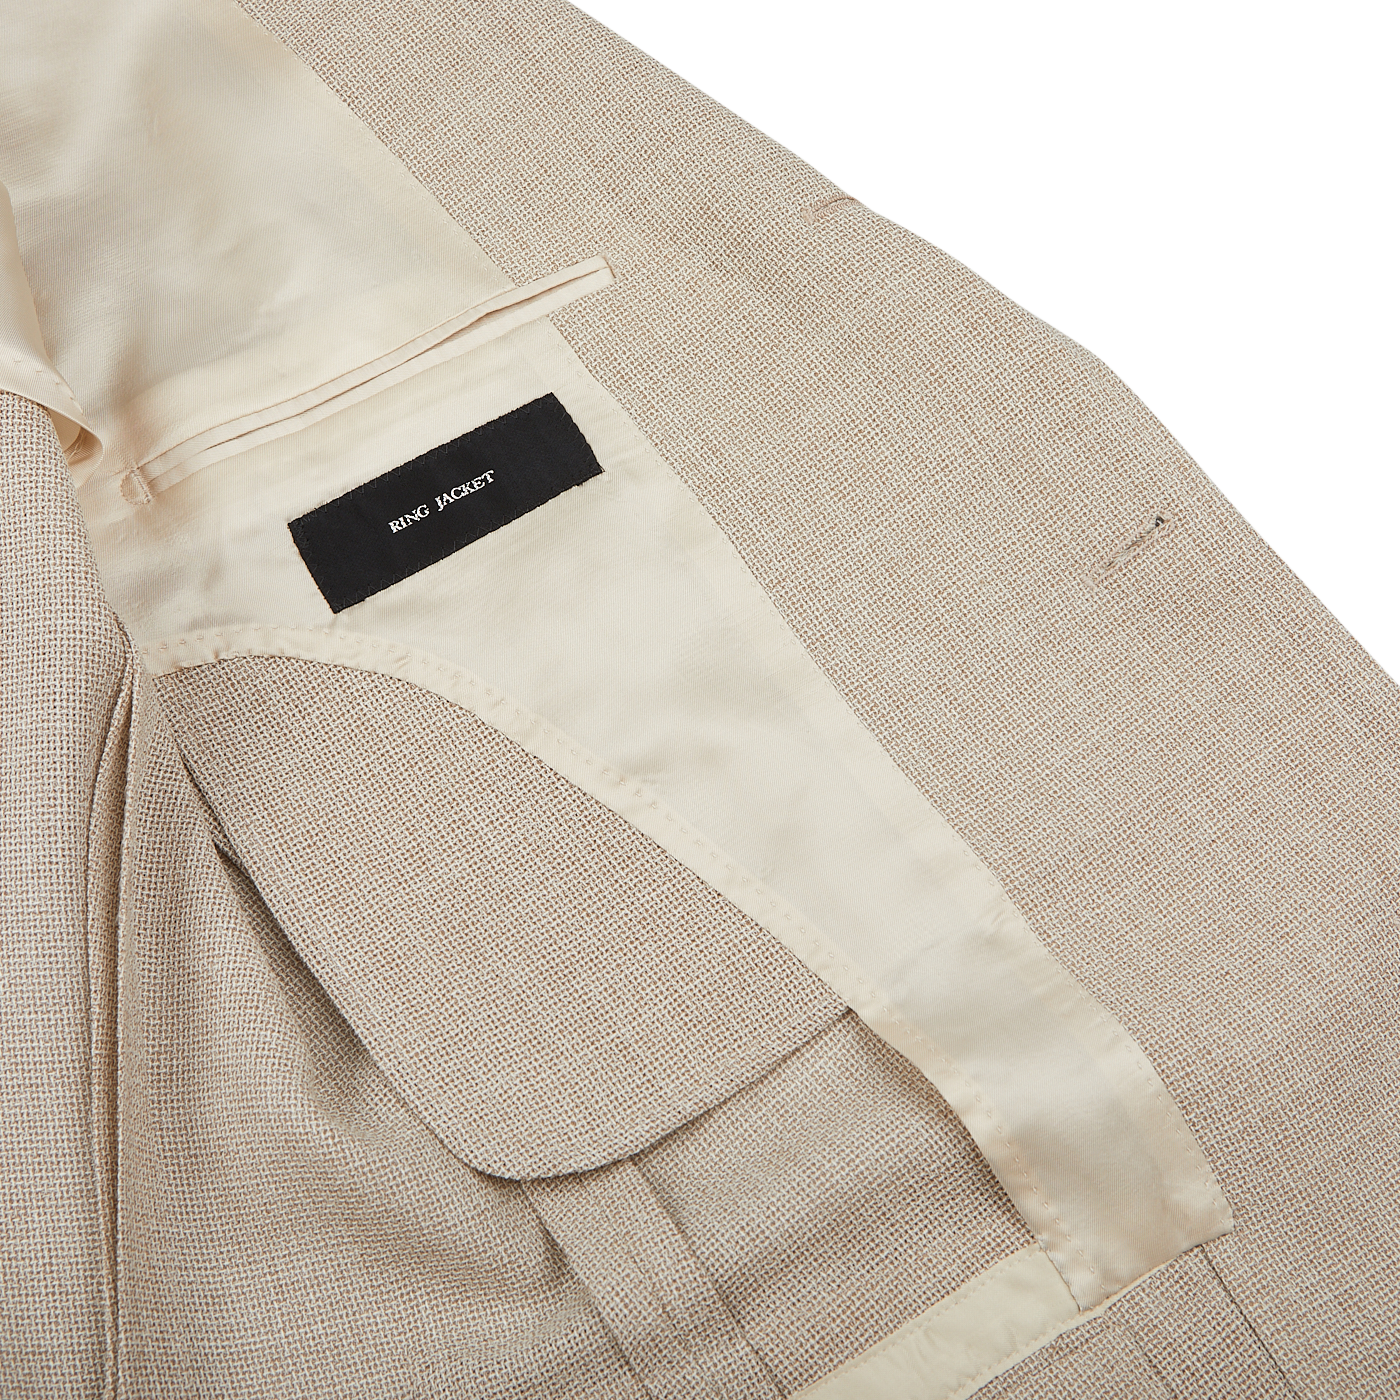 Close-up of a Light Beige Wool Balloon Travel Blazer with a visible inner pocket and a label reading "Ring Jacket" on a white background.